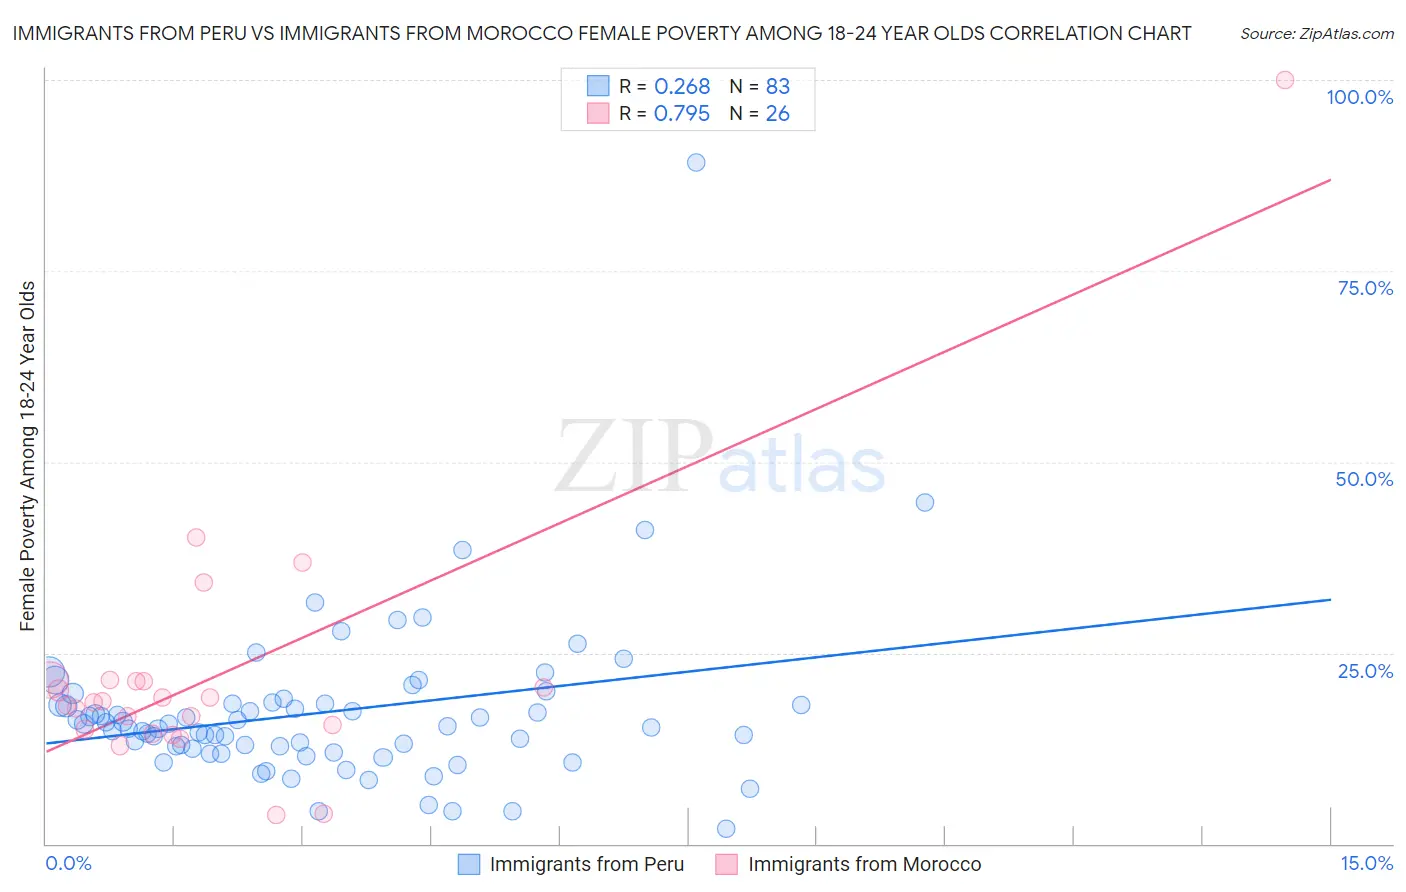 Immigrants from Peru vs Immigrants from Morocco Female Poverty Among 18-24 Year Olds